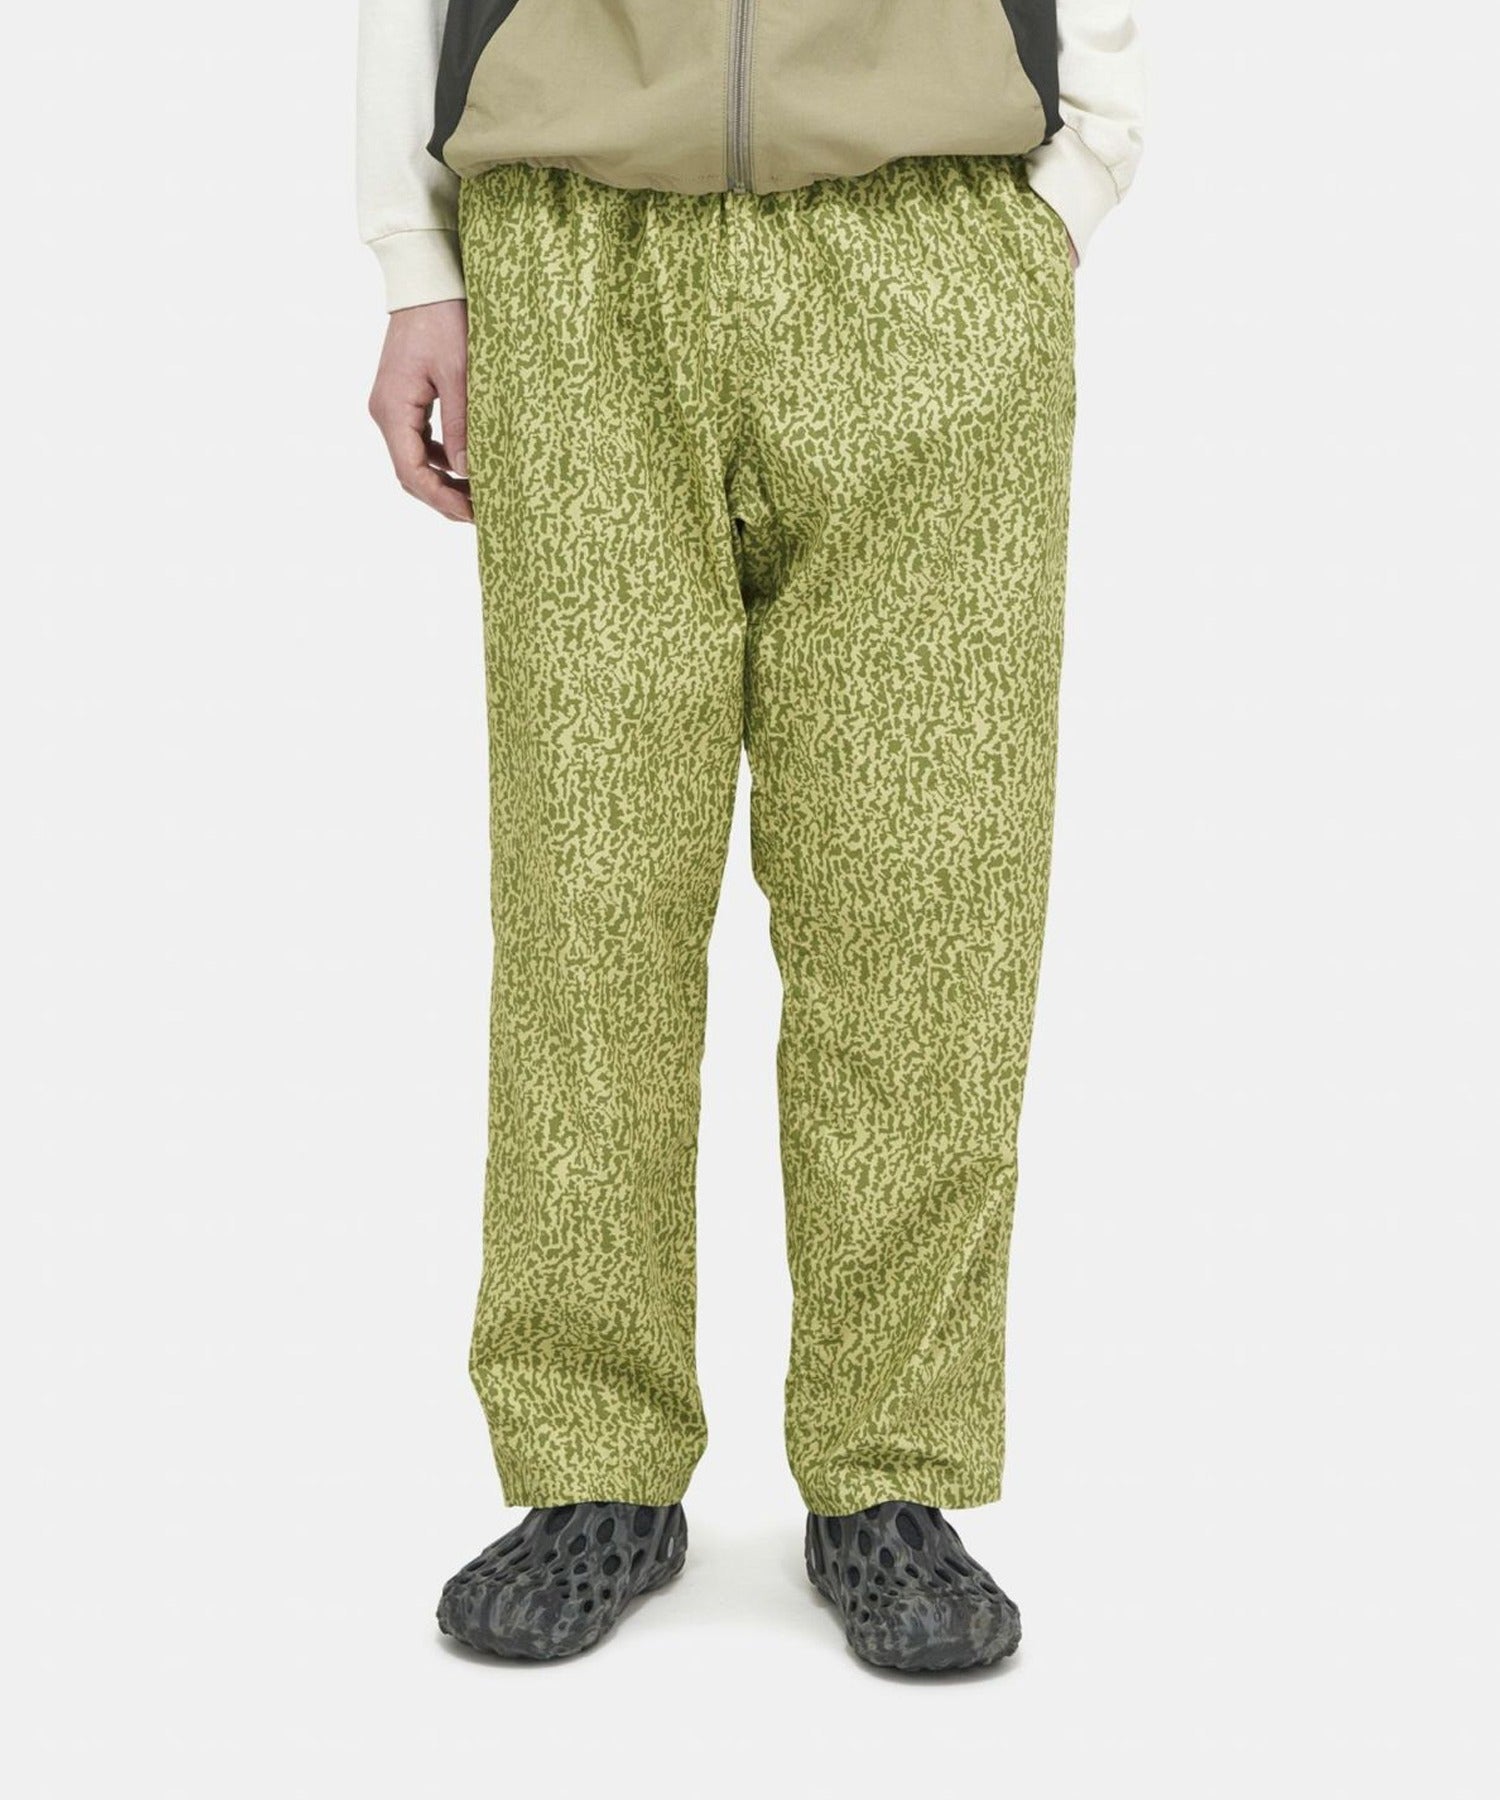 SWELL PANT